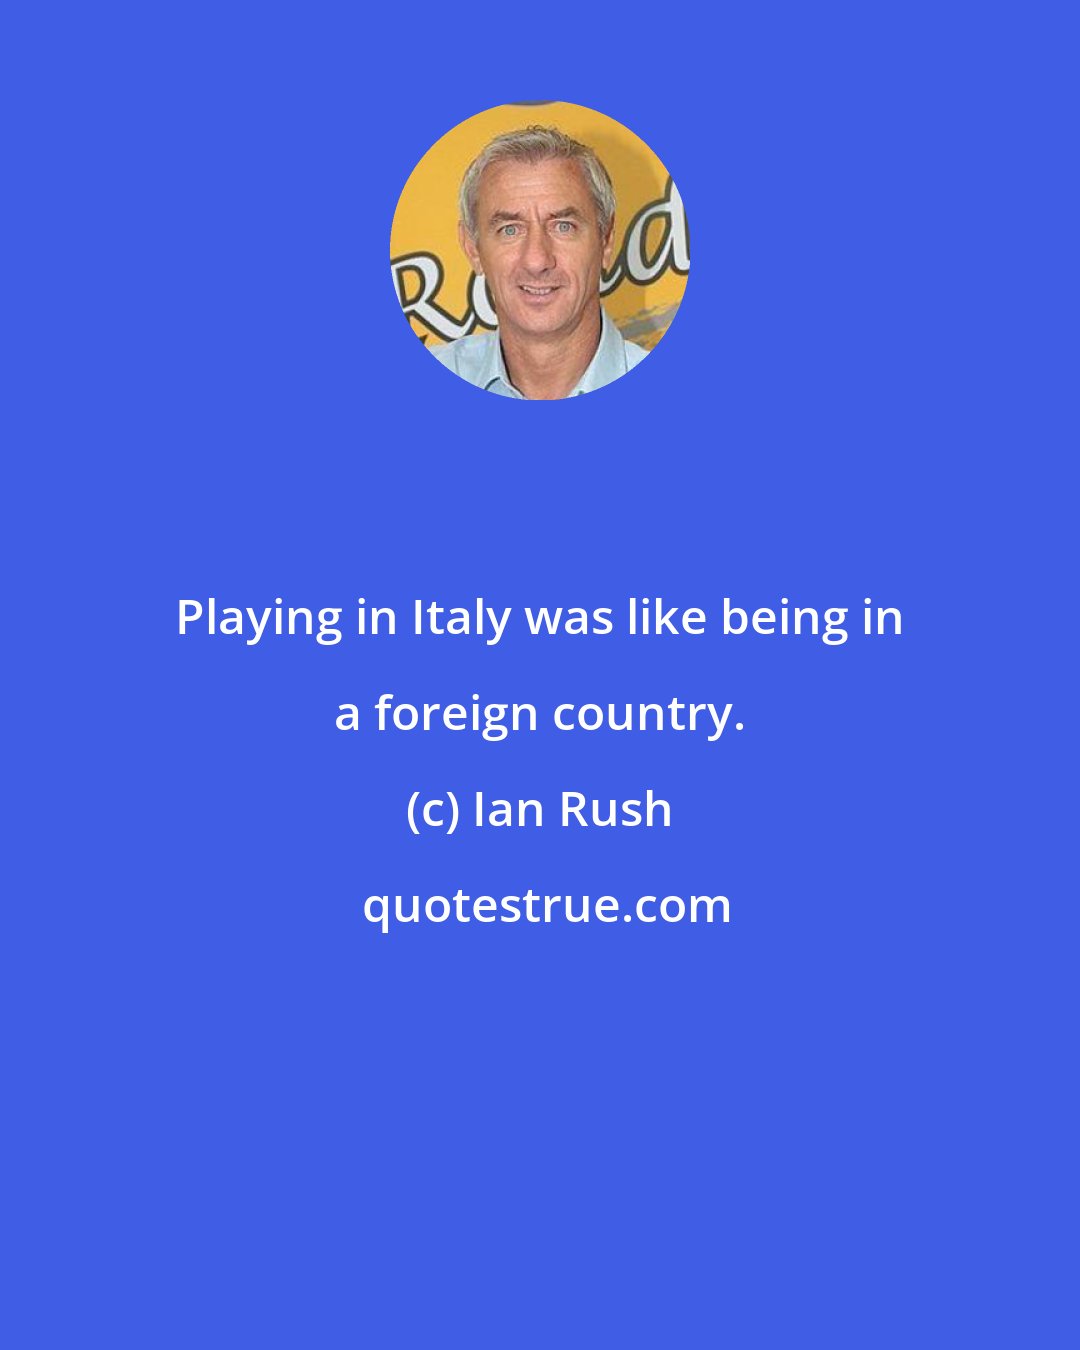 Ian Rush: Playing in Italy was like being in a foreign country.